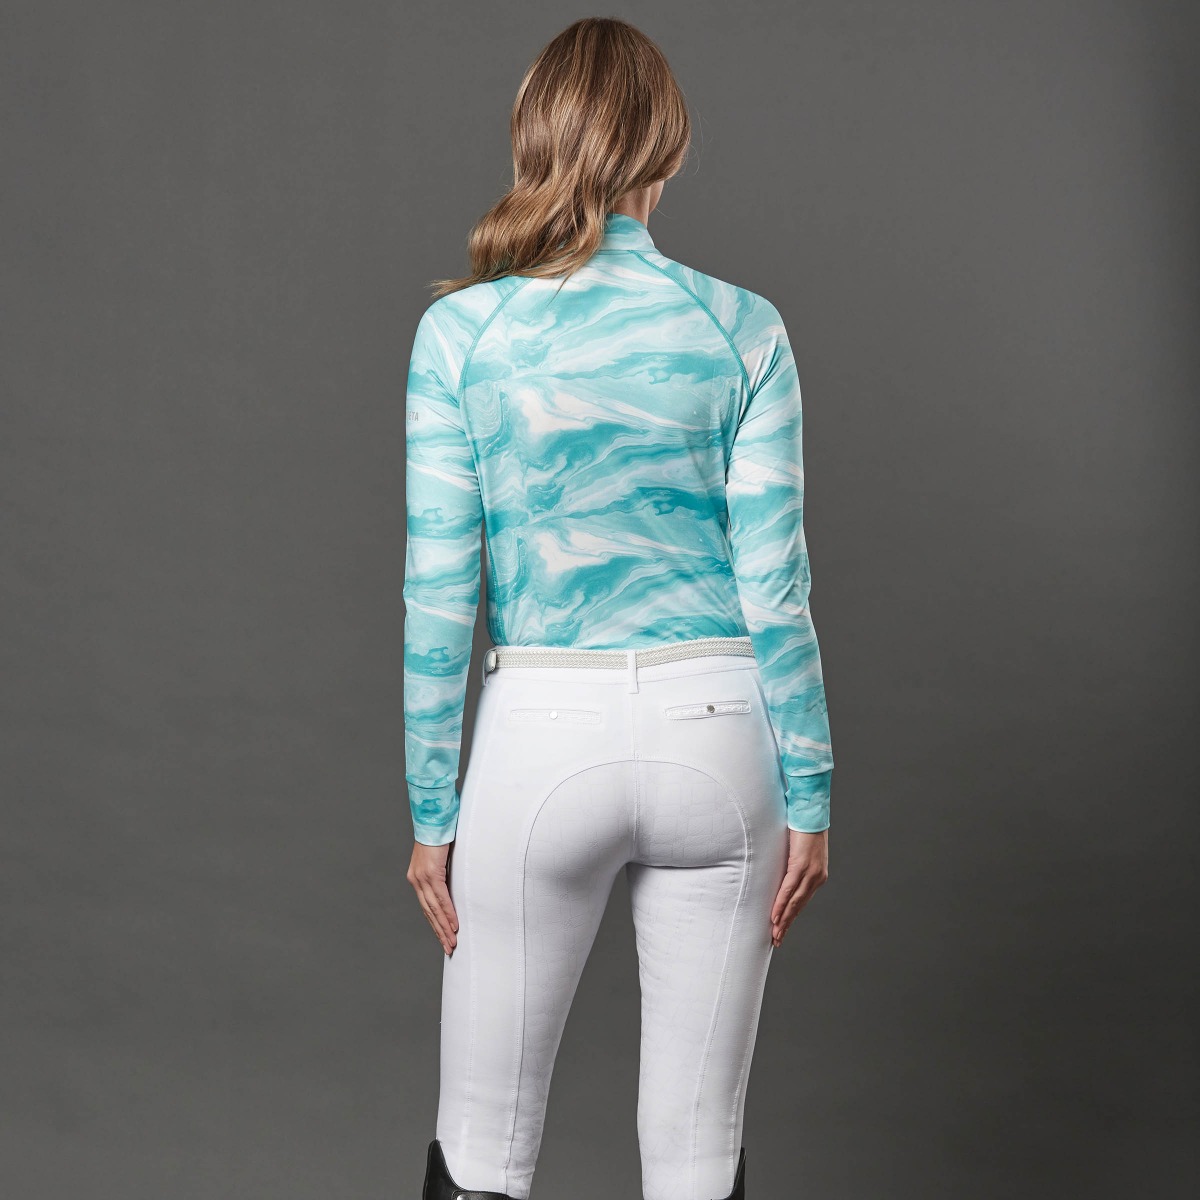 marble print turquoise top